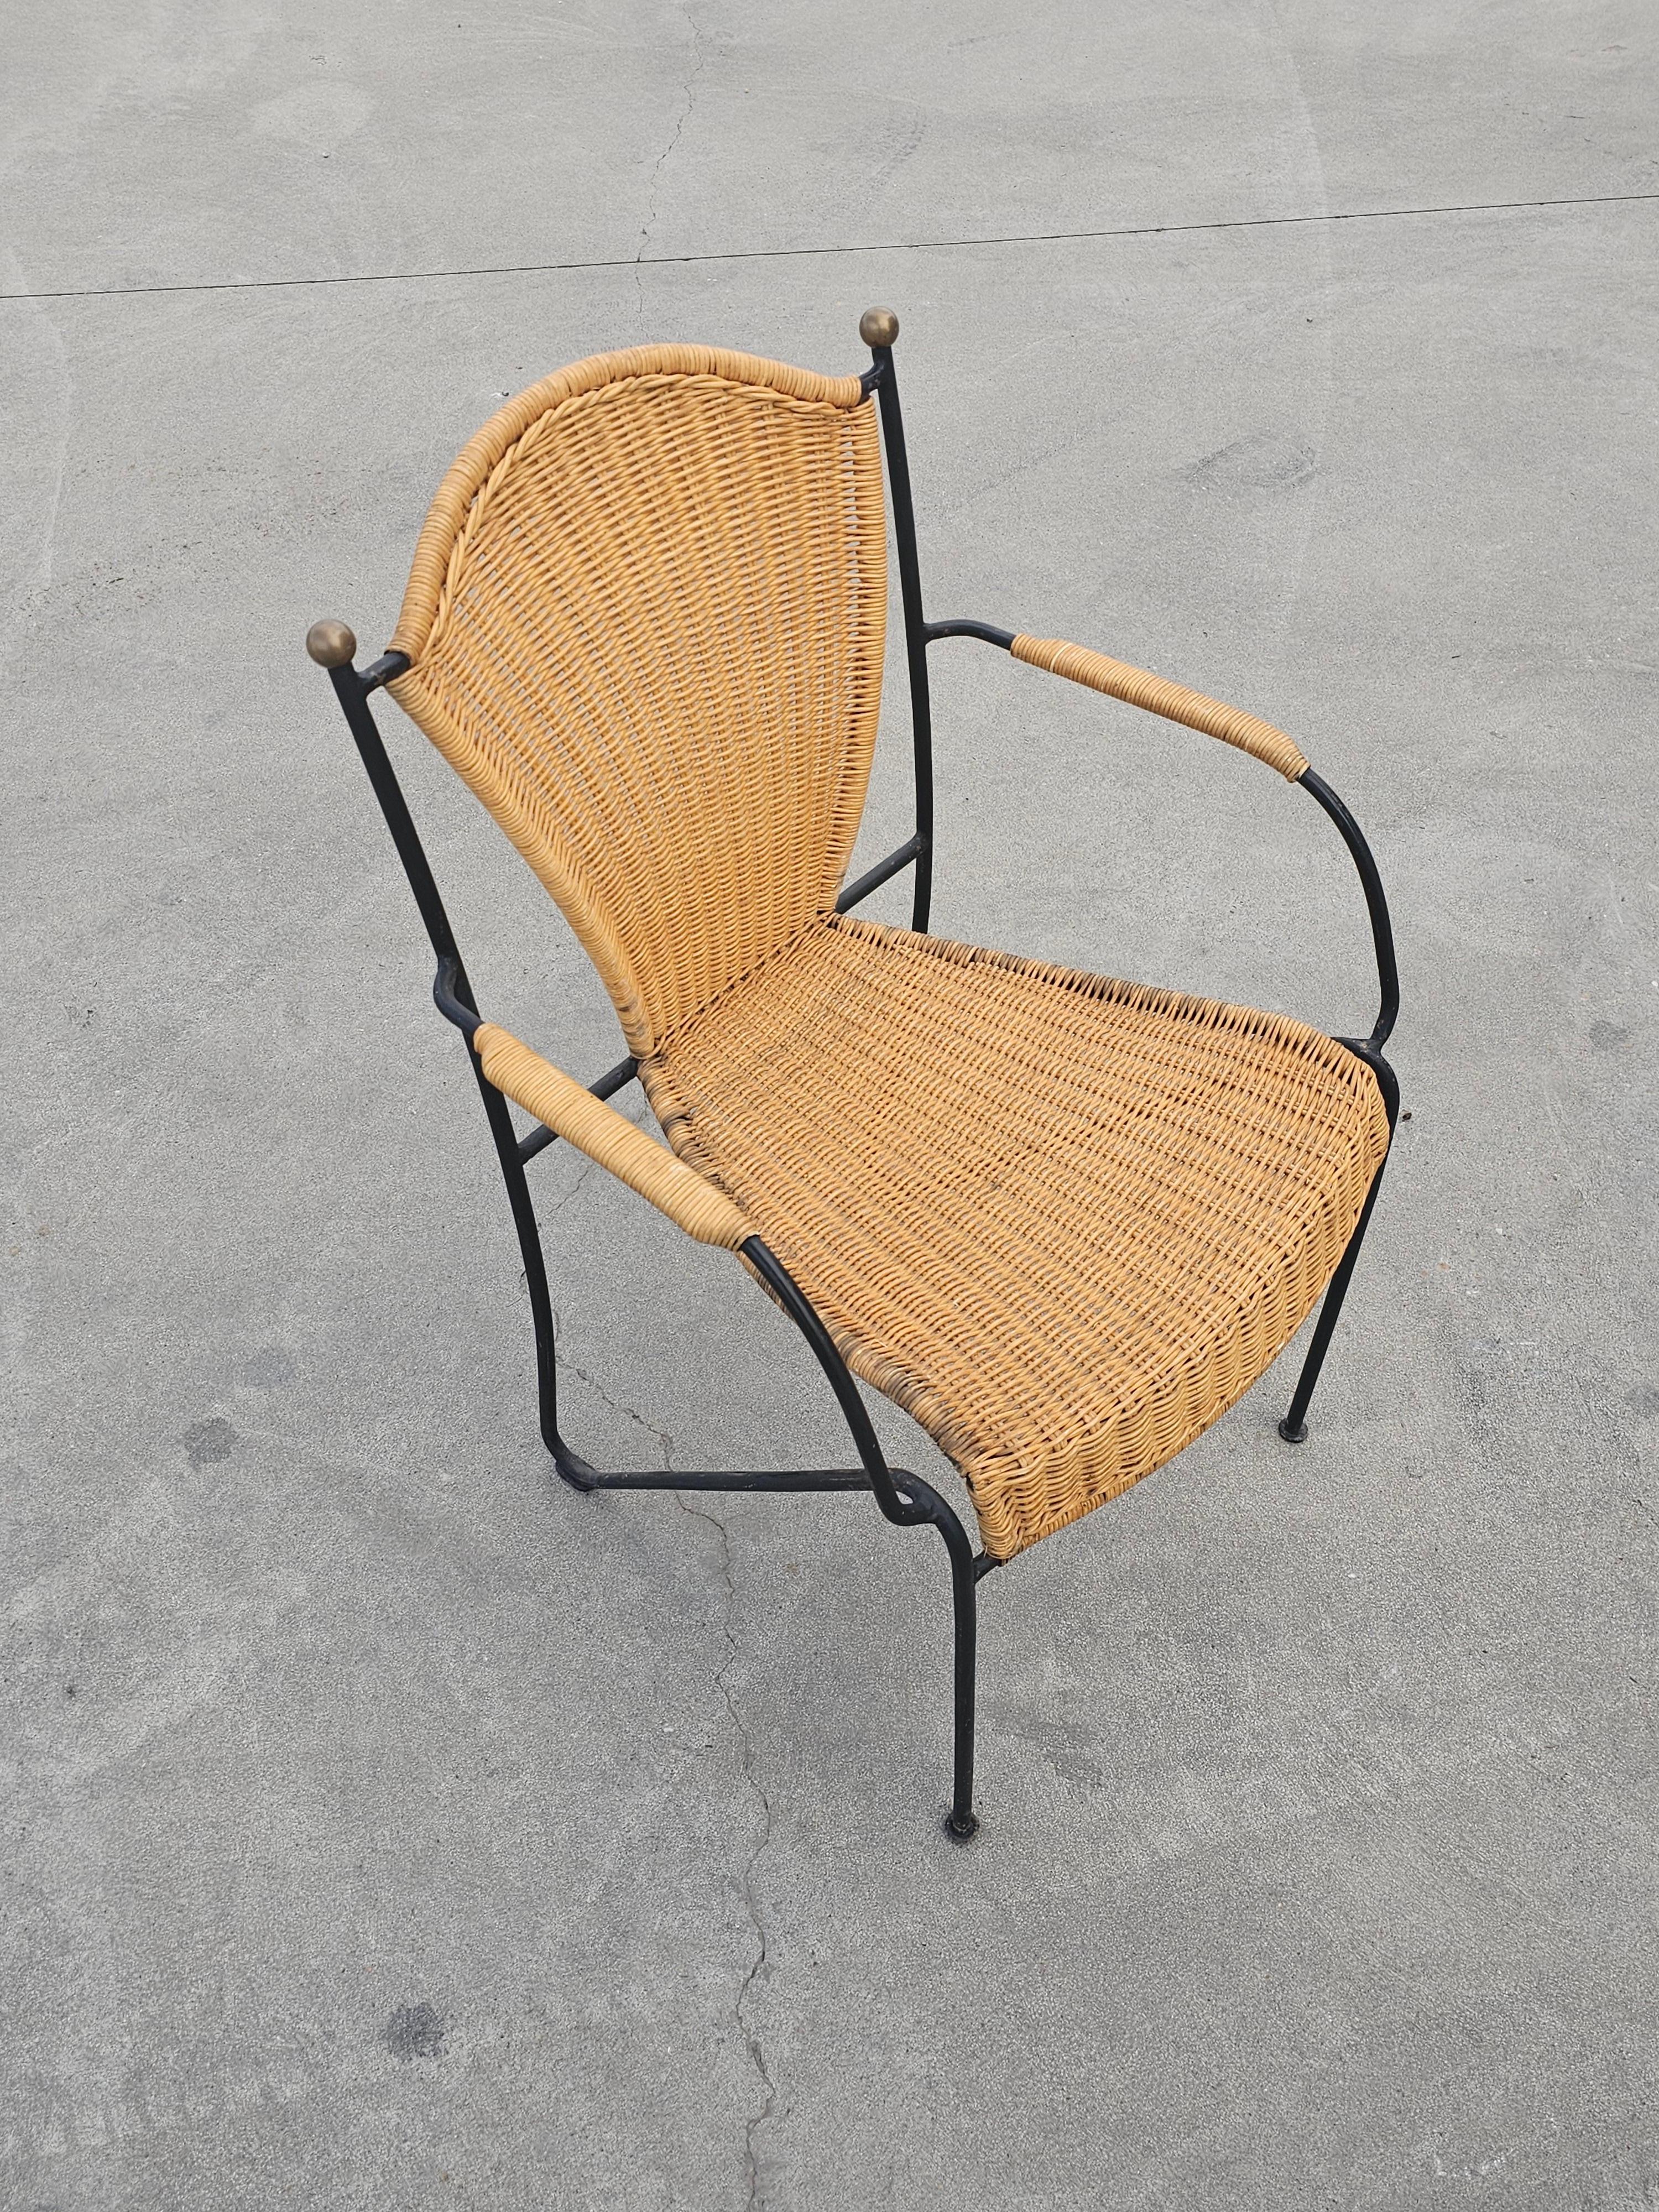 Pair of Frederic Weinberg Wicker, Wrought Iron and Brass Chairs, USA 1950s For Sale 3